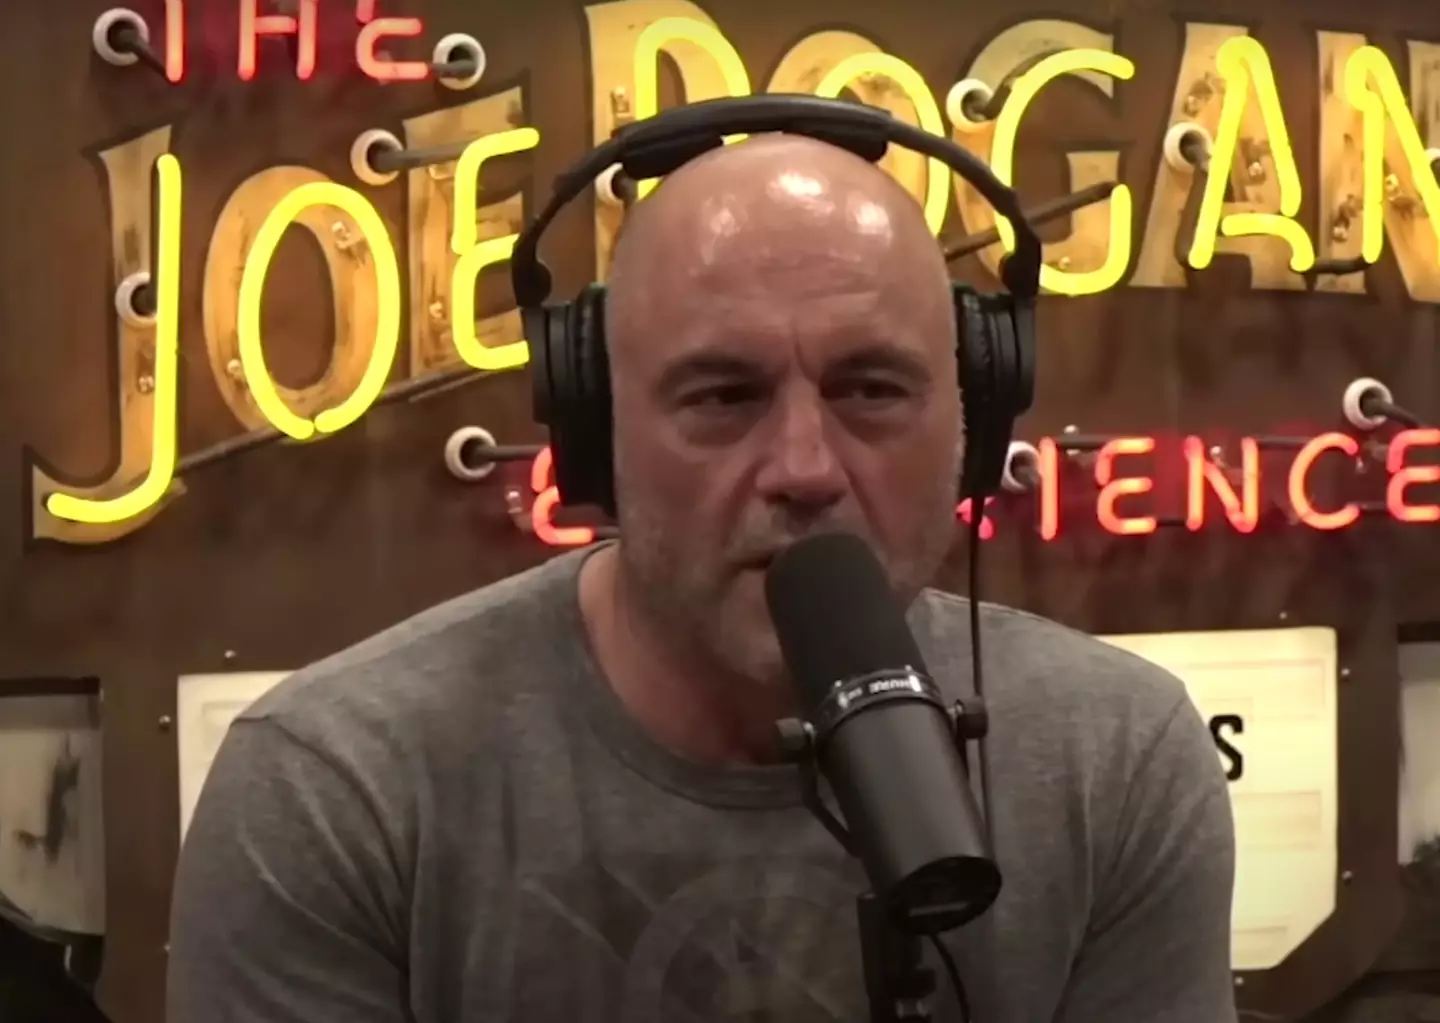 Joe Rogan has not addressed the comments since.